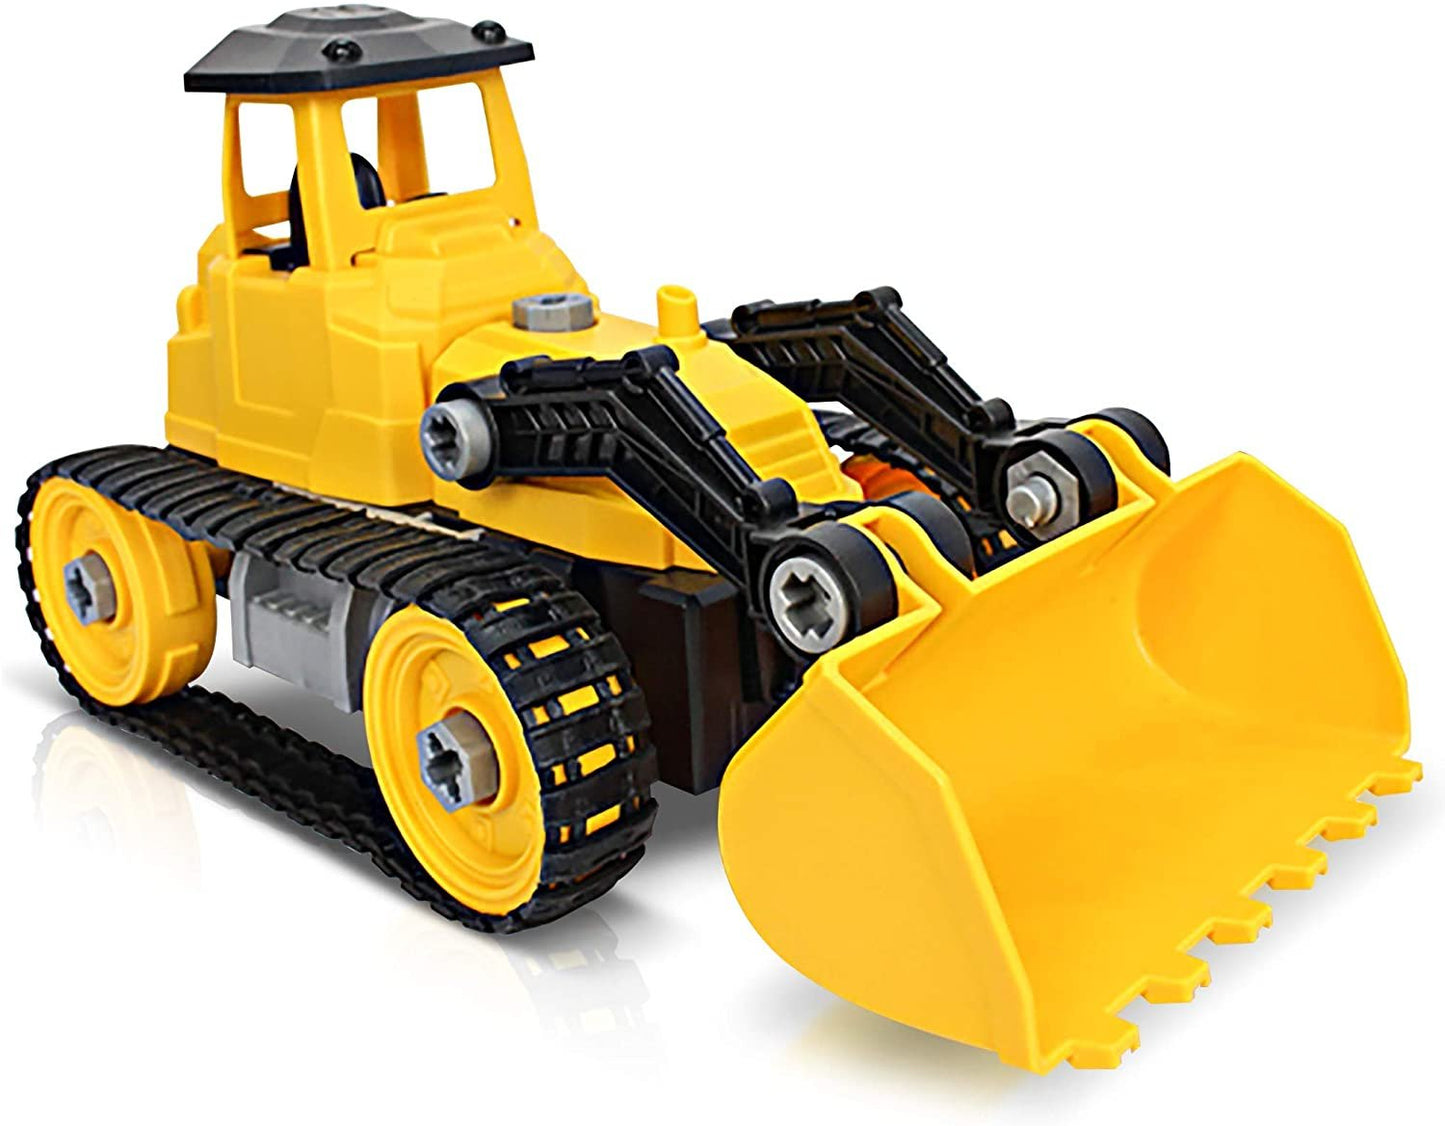 ArtCreativity Take Apart Yellow Bulldozer Toy Truck - 46 Pieces with Tools - Large Excavating Backhoe Toy - Perfect Digger Toy and Great Birthday Gift Idea for Boys and Girls Ages 3+